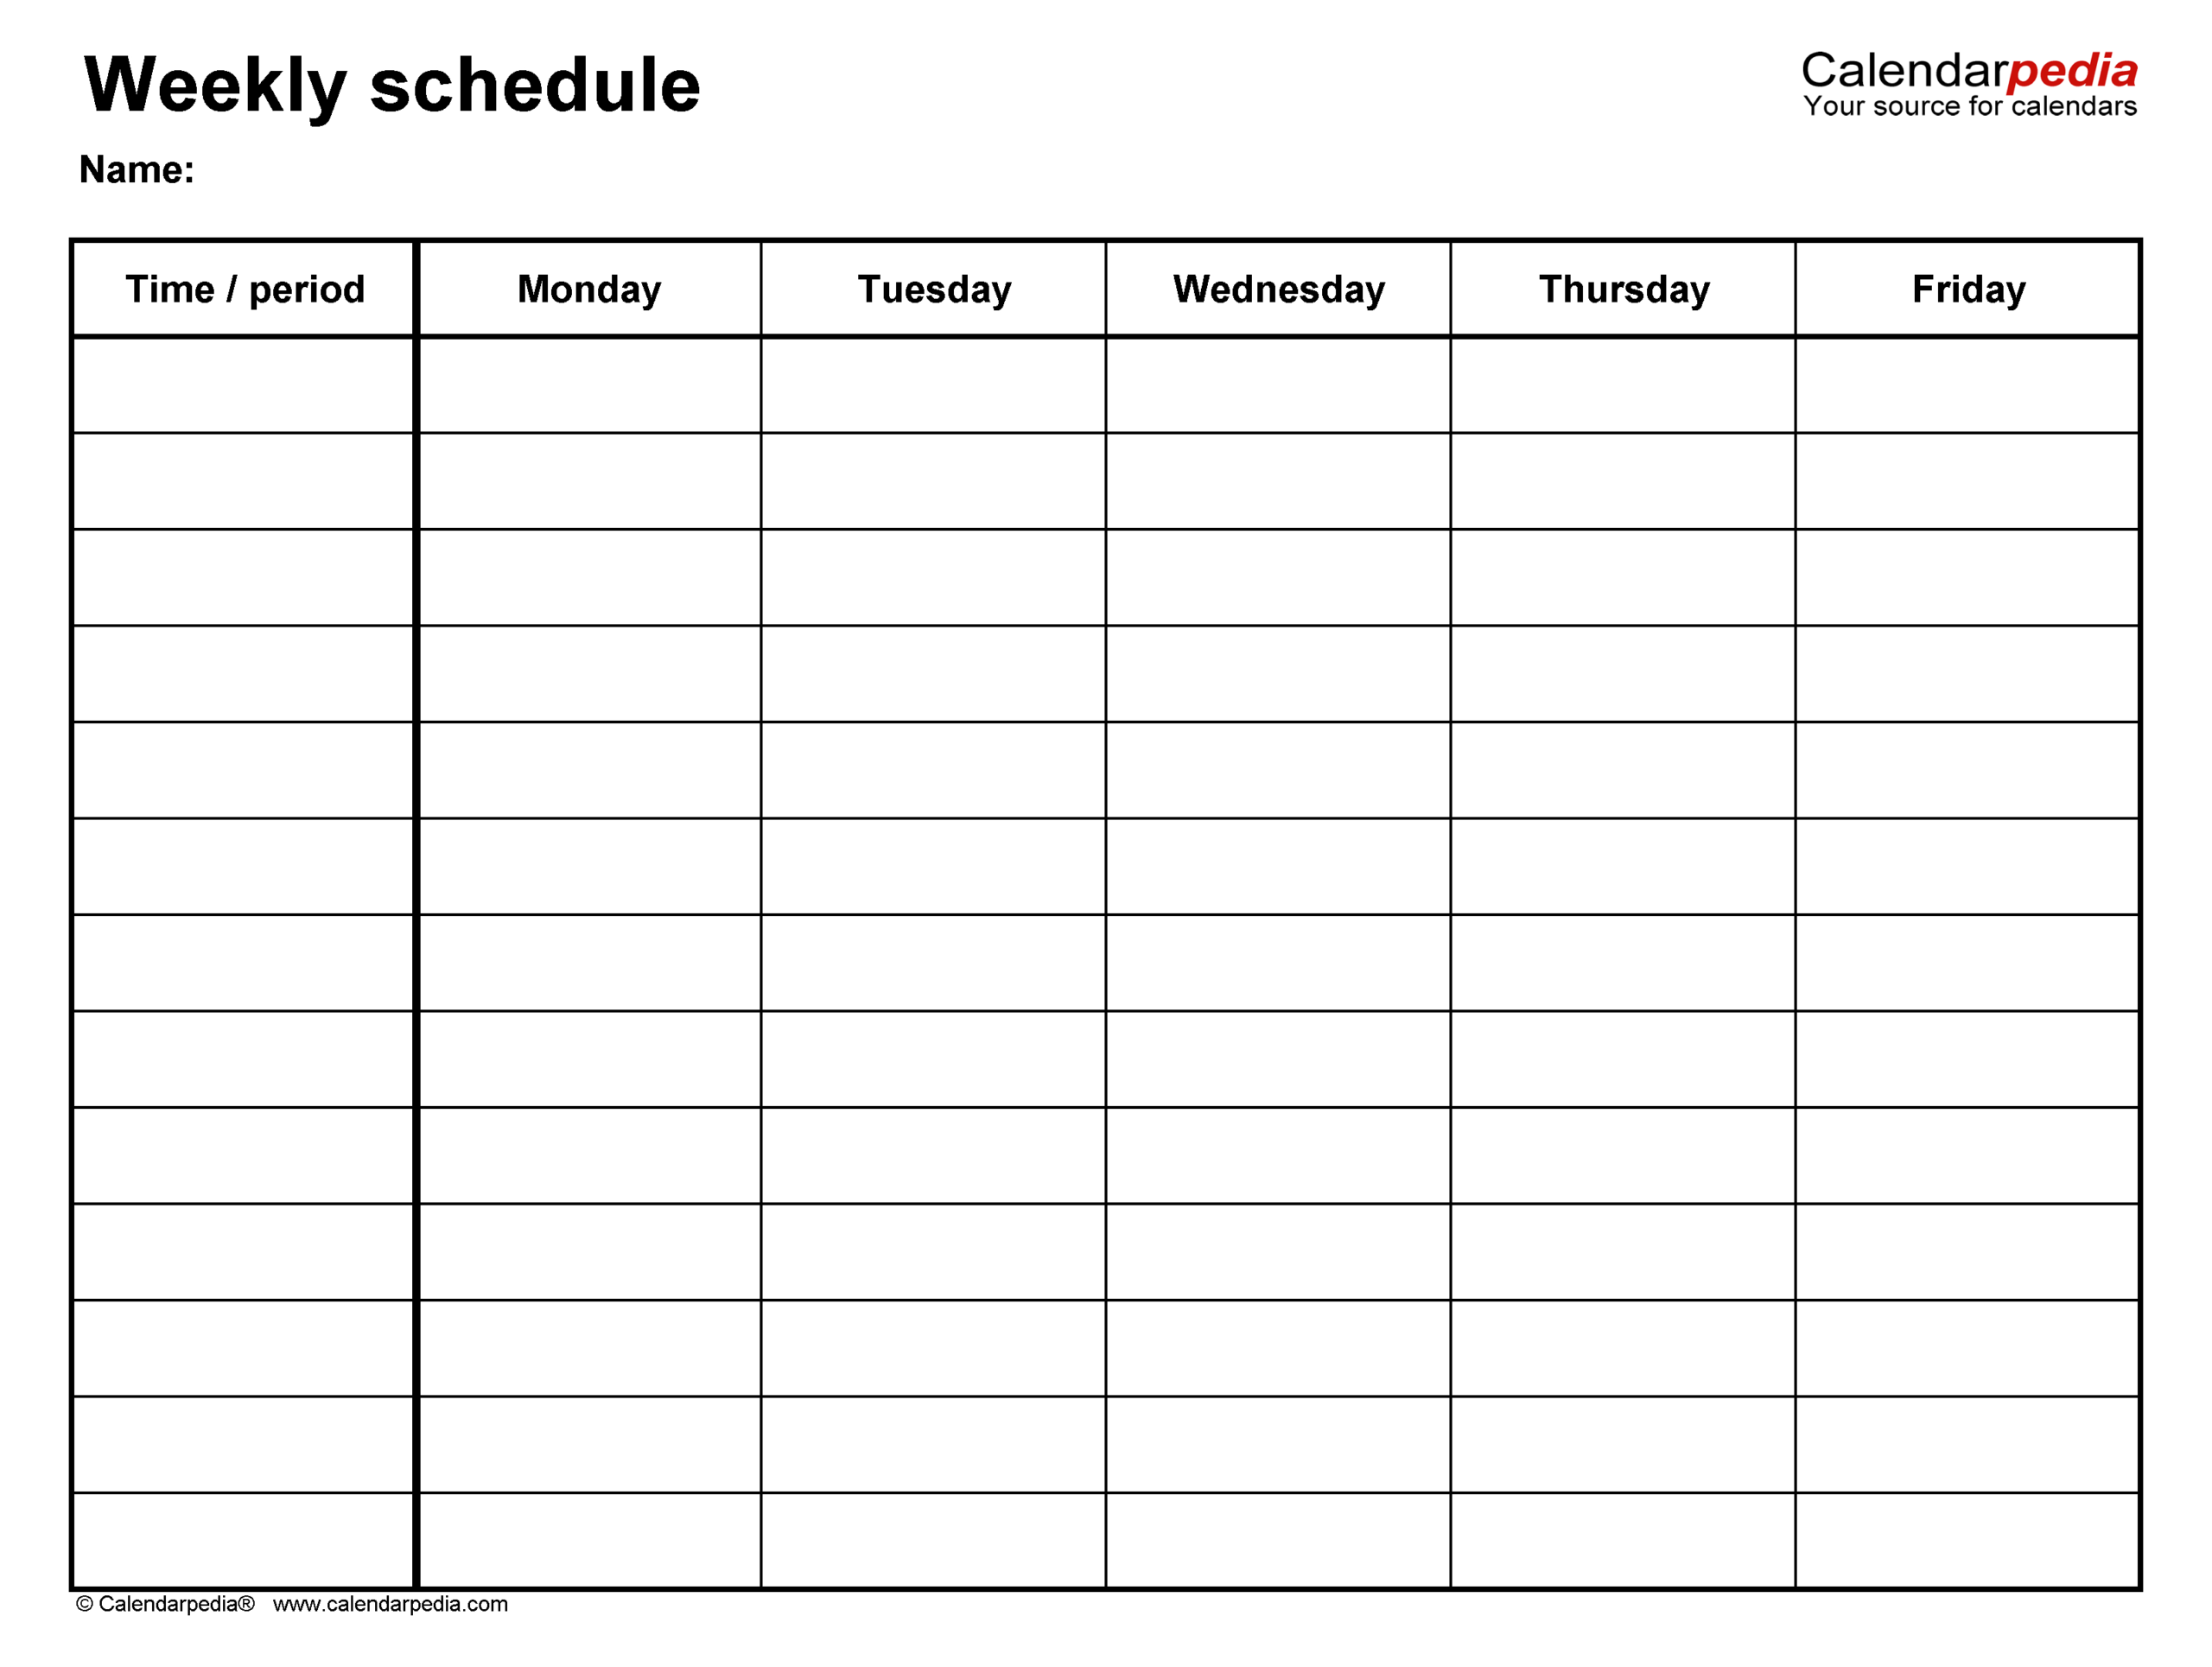 Free Weekly Schedules For Pdf - 18 Templates